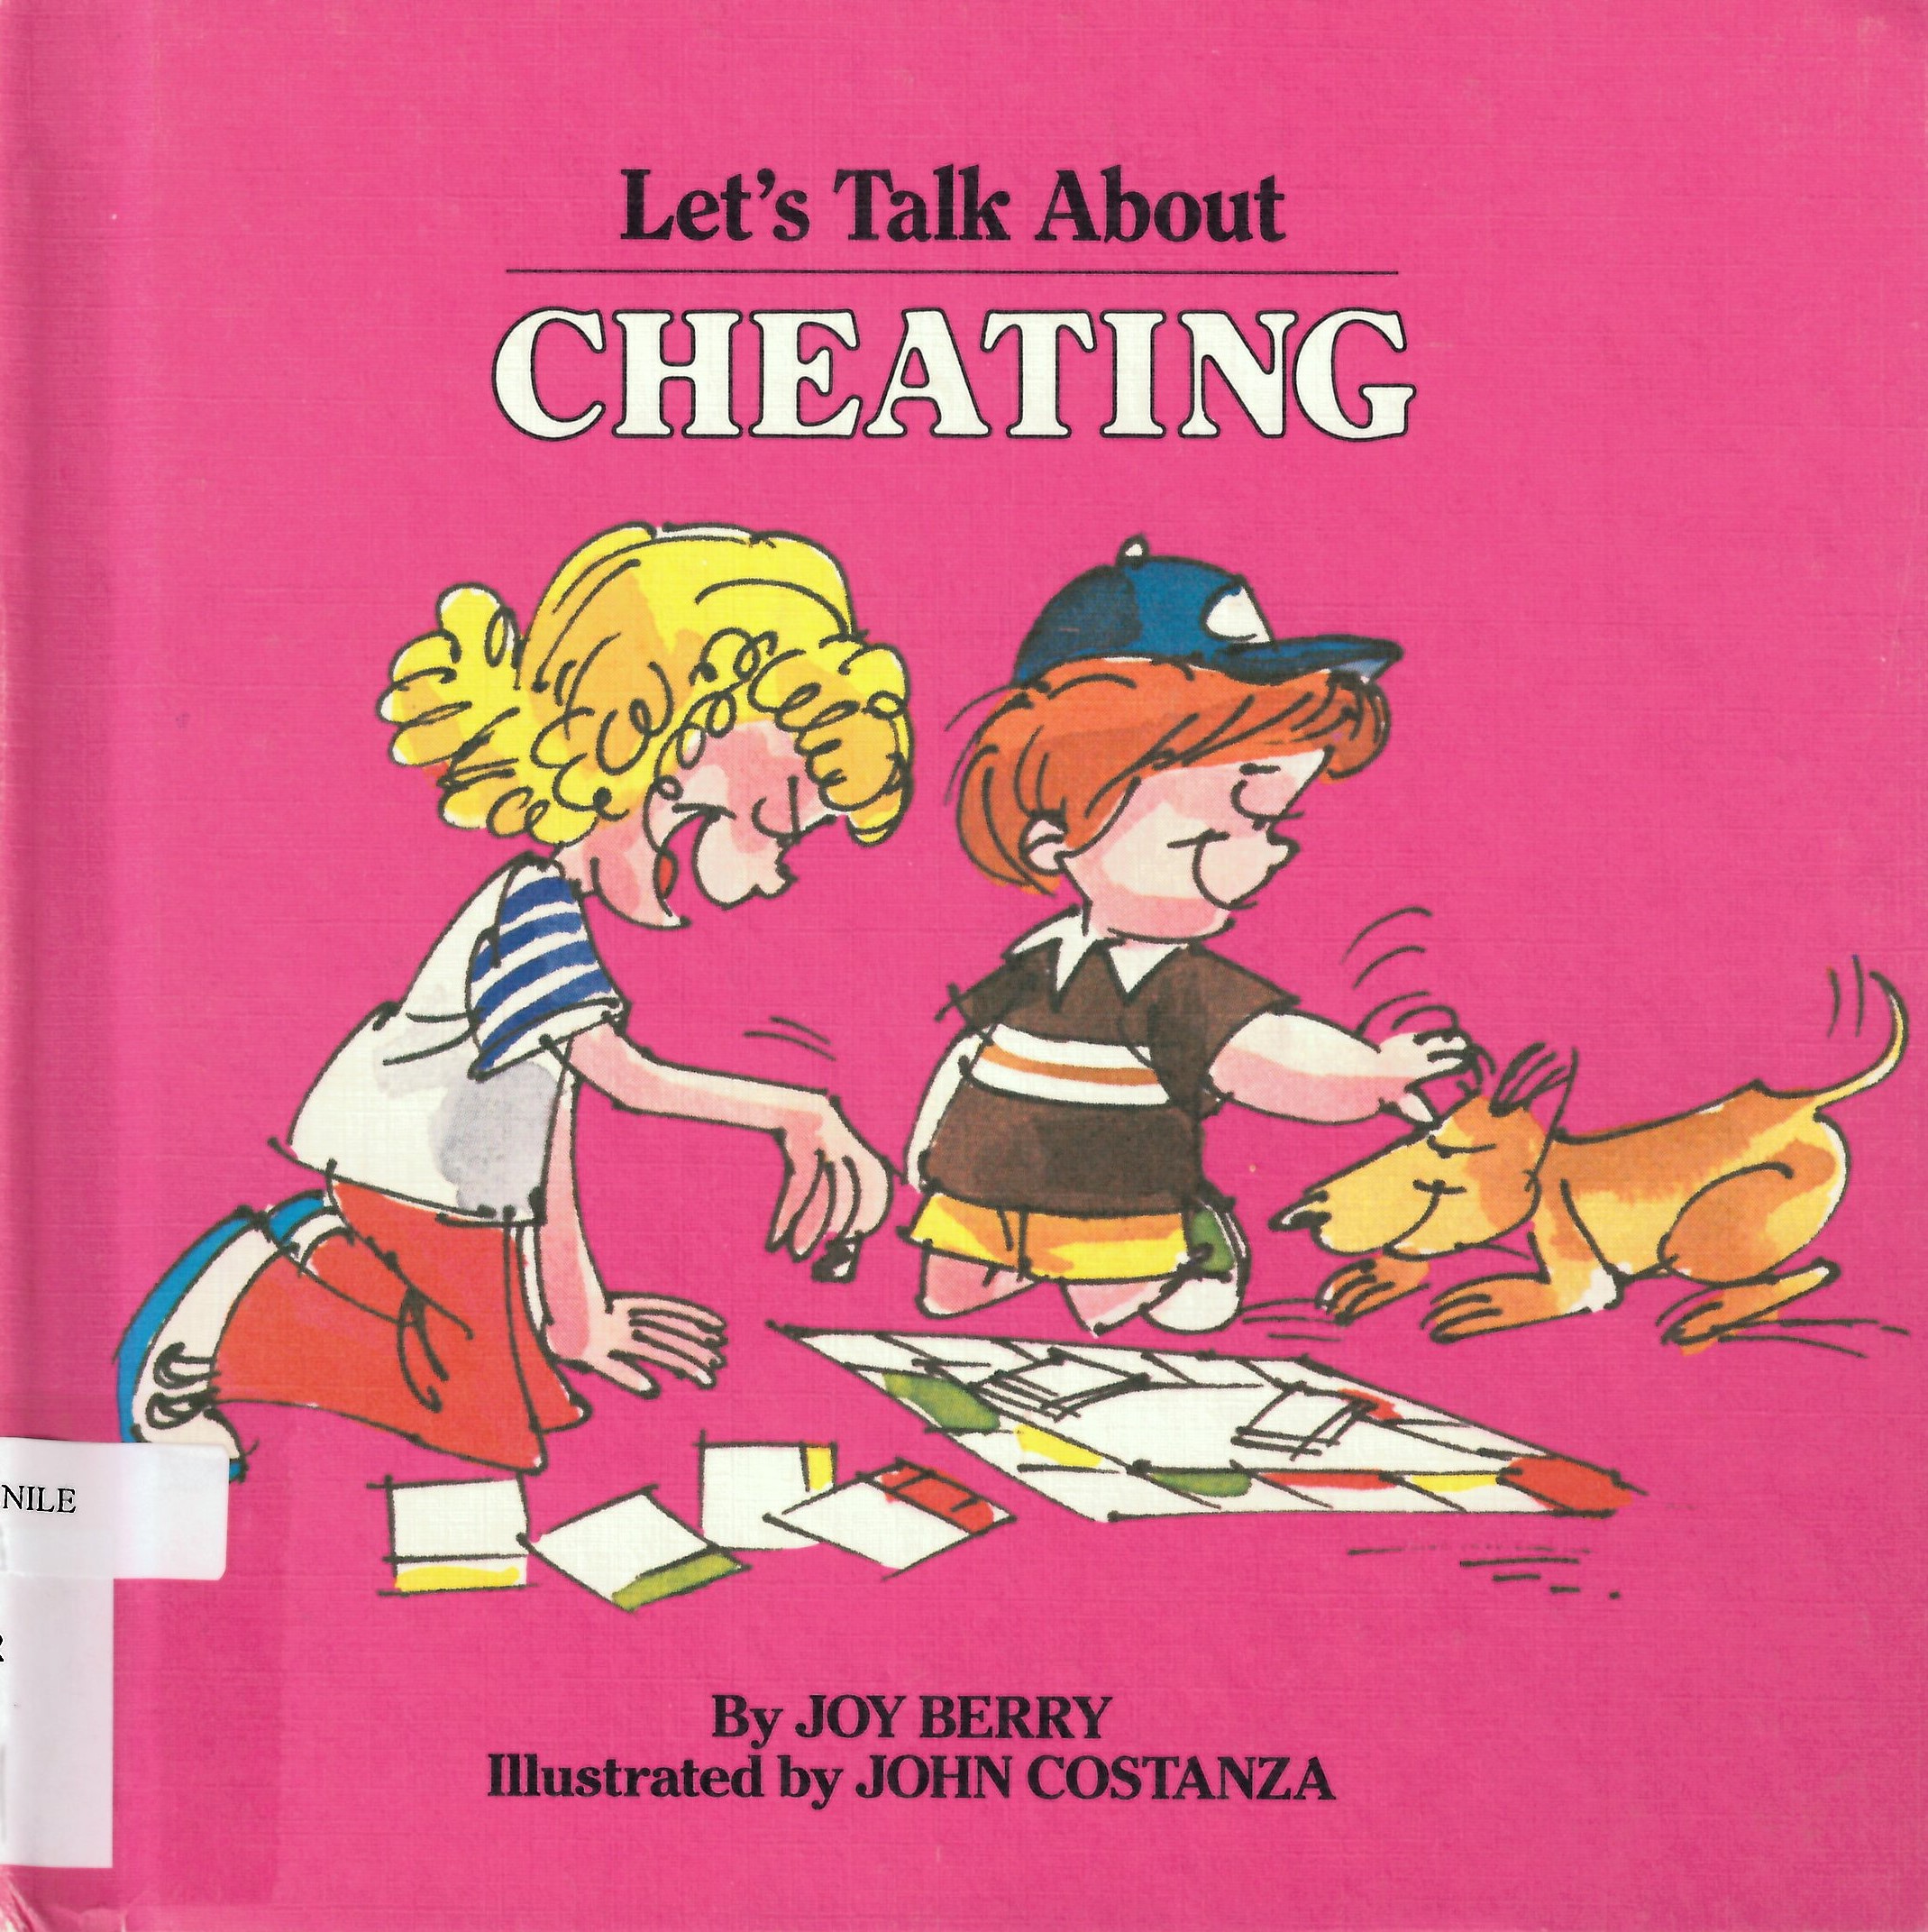 Let's talk about cheating